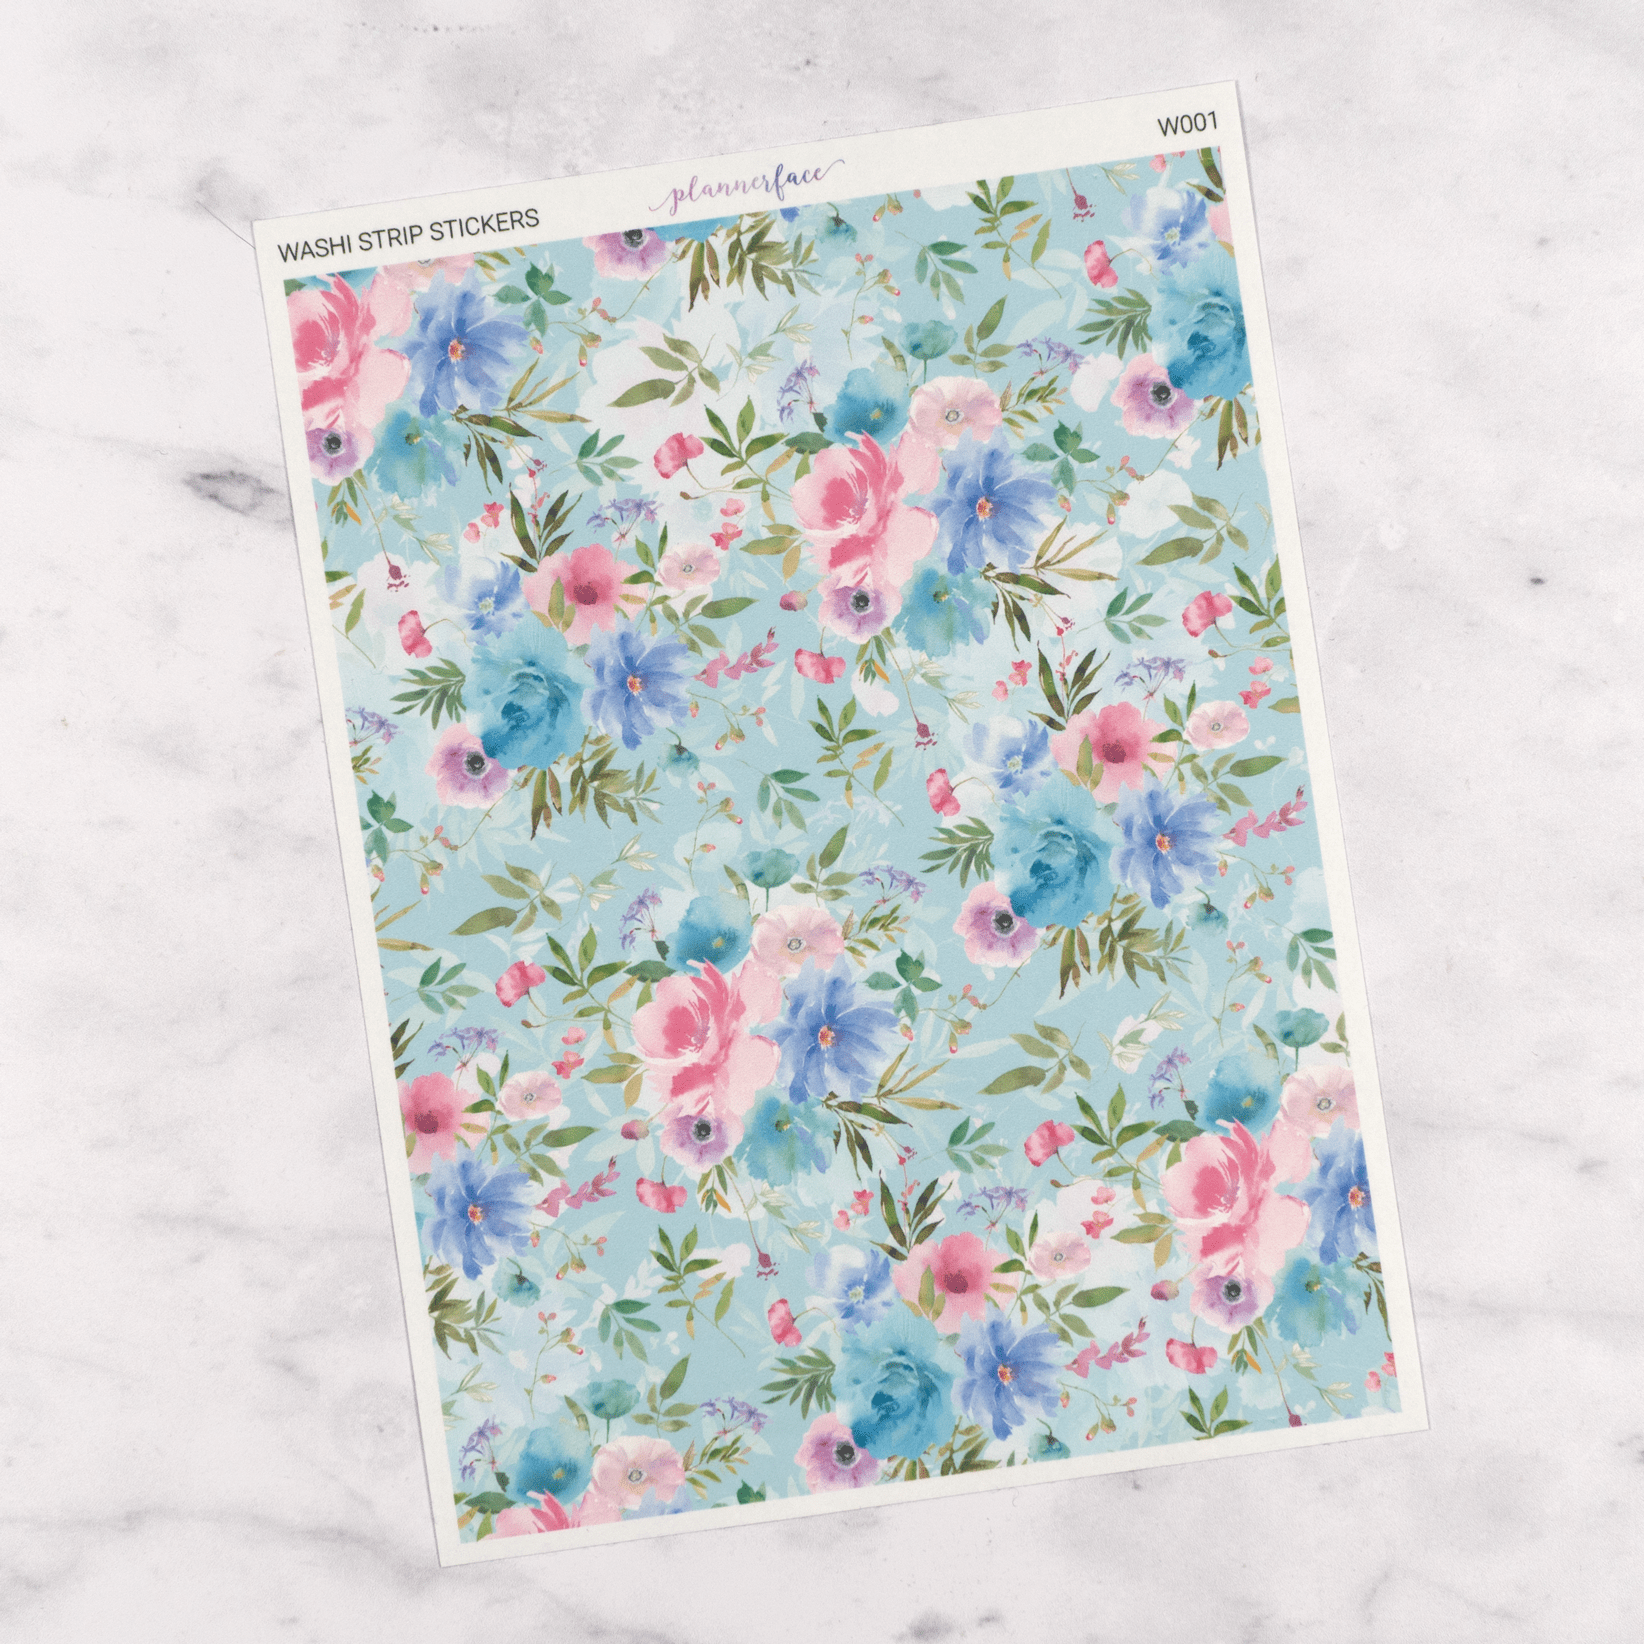 Mint &amp; Pink Floral | Washi Tape Strips by Plannerface